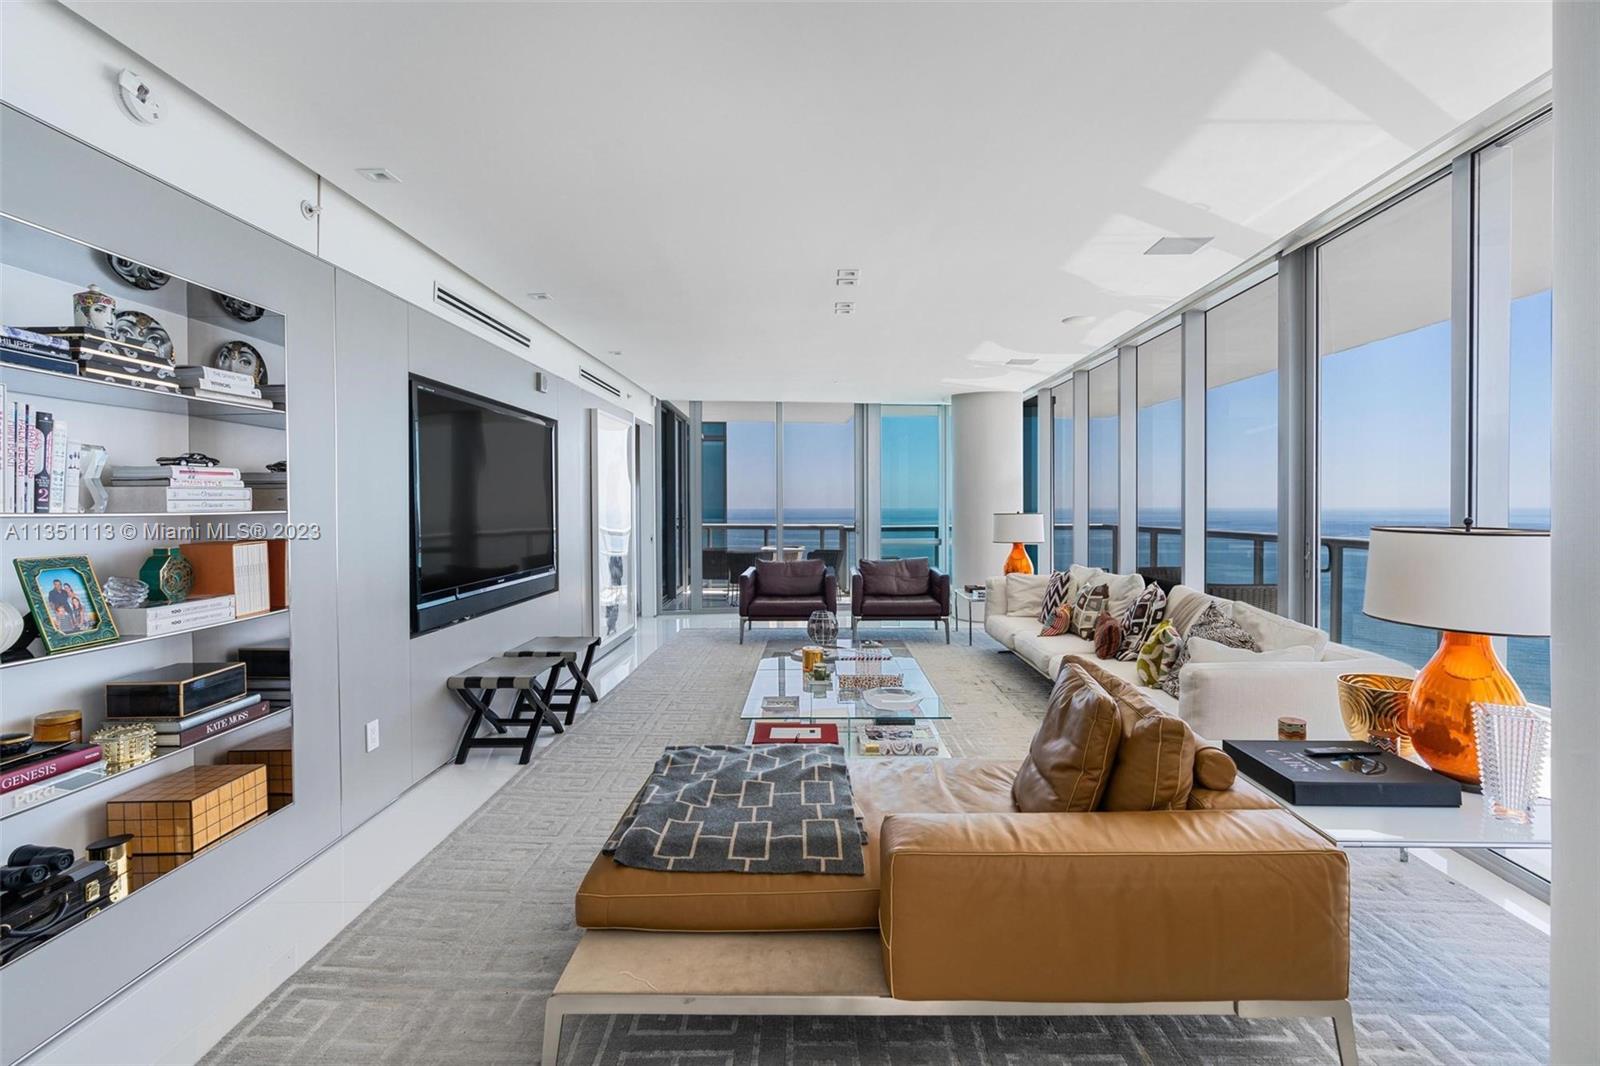 Stunning Move-In Ready Residence at the Jade Ocean designed by Carlos Ott, located in the middle of the Sunny Isles Beach. Direct ocean and city views with the natural light all day entering through floor-to-ceiling windows. Private elevator going to your foyer.

Building features five-star amenities, including: infinity pool from East to West, state of the art fitness center, concierge, beach service and more. Unit can be rented for a shorter term, owner is flexible.